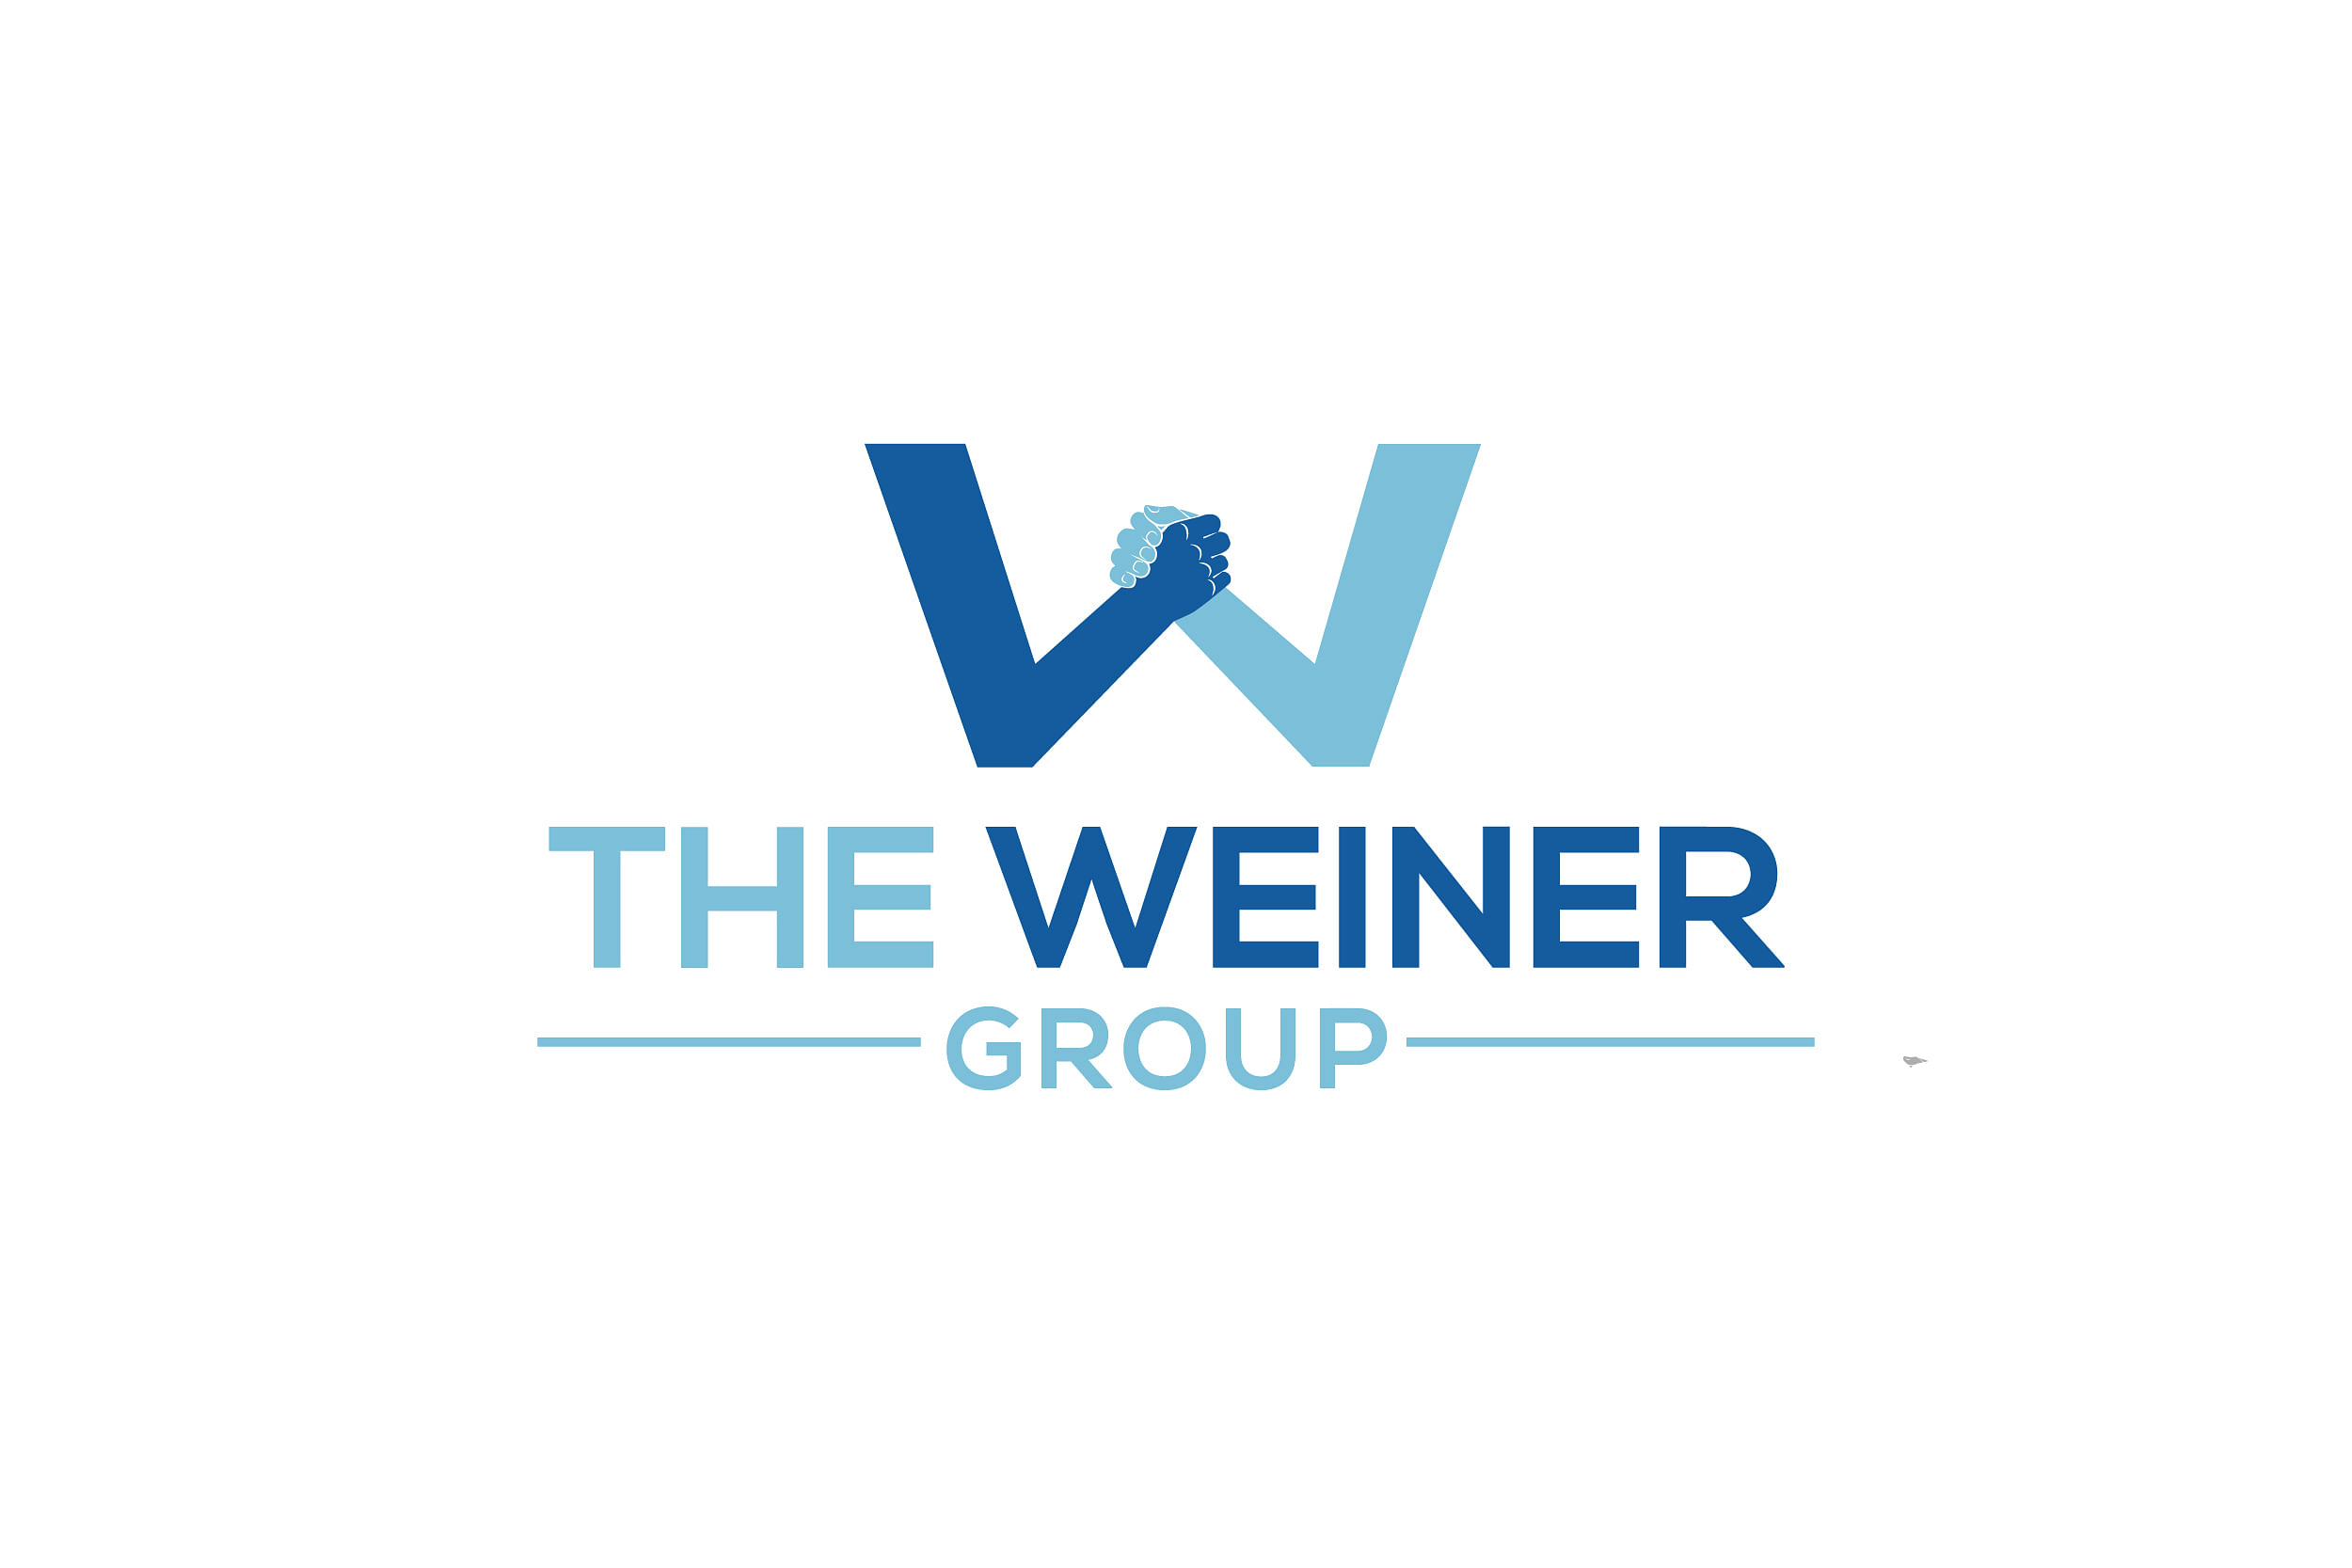 The Weiner Group culture